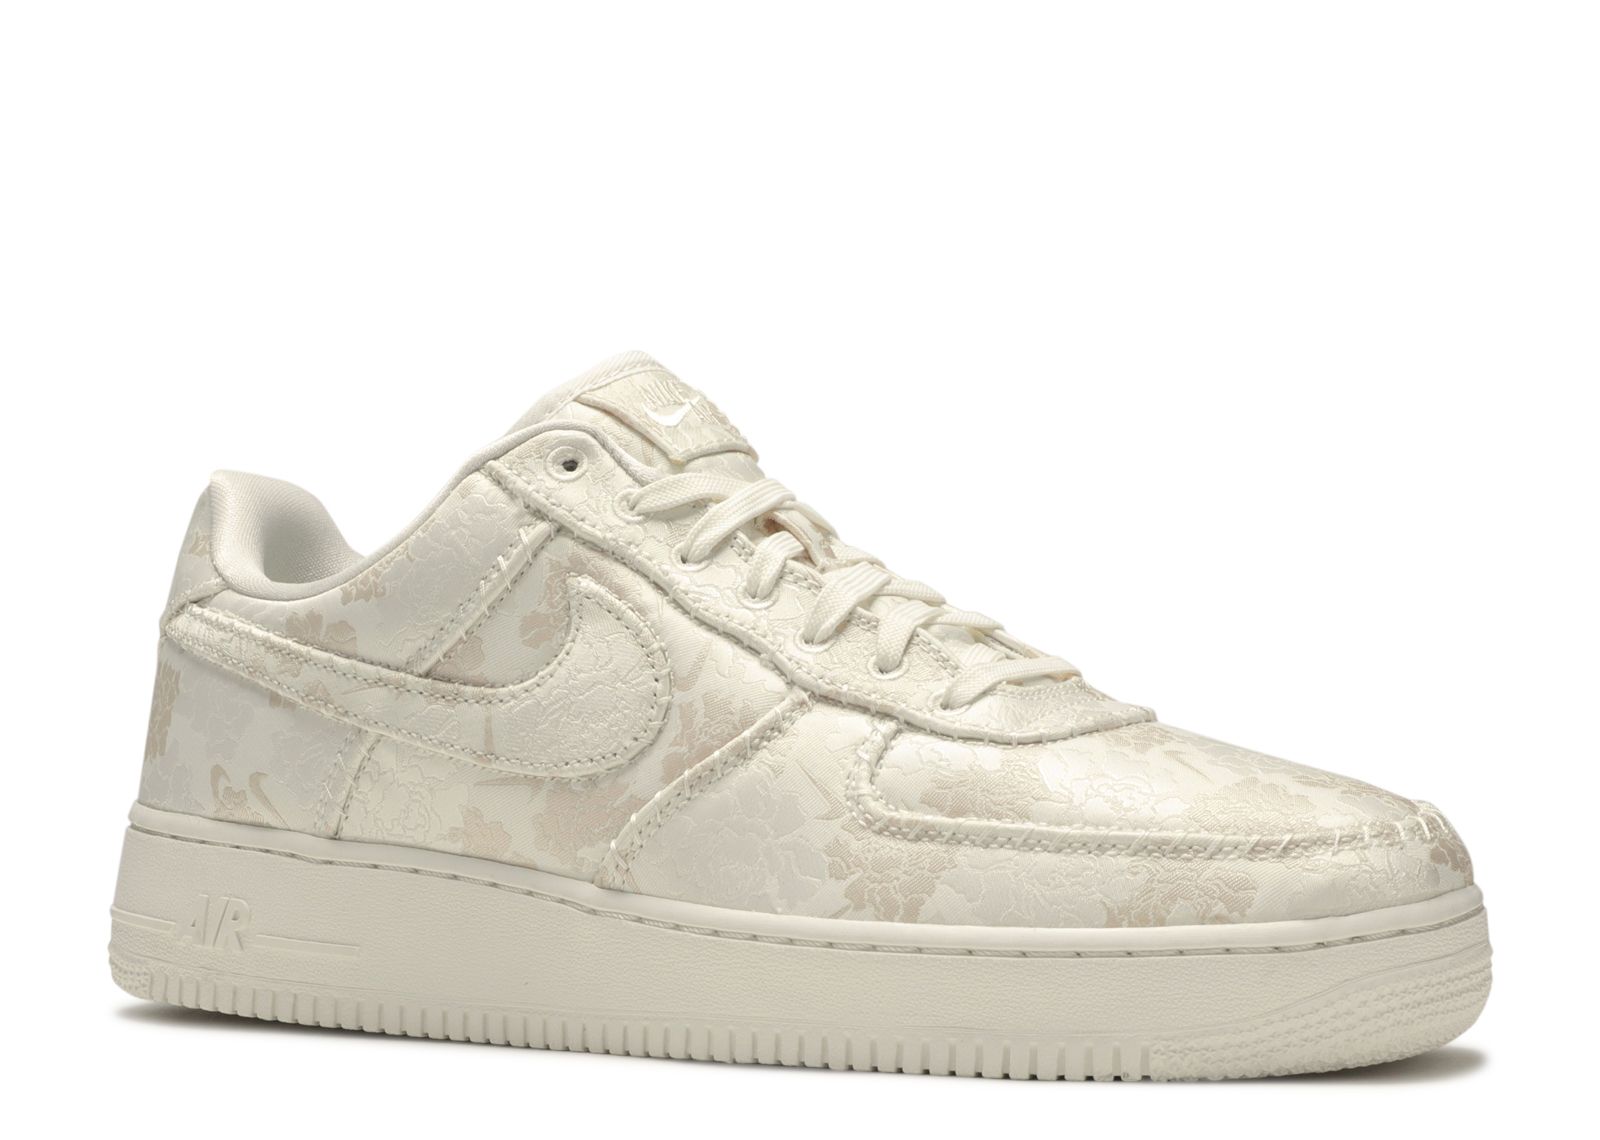 Air Force 1 '07 PRM 3 'Pale Ivory' - Nike - AT4144 100 - pale 